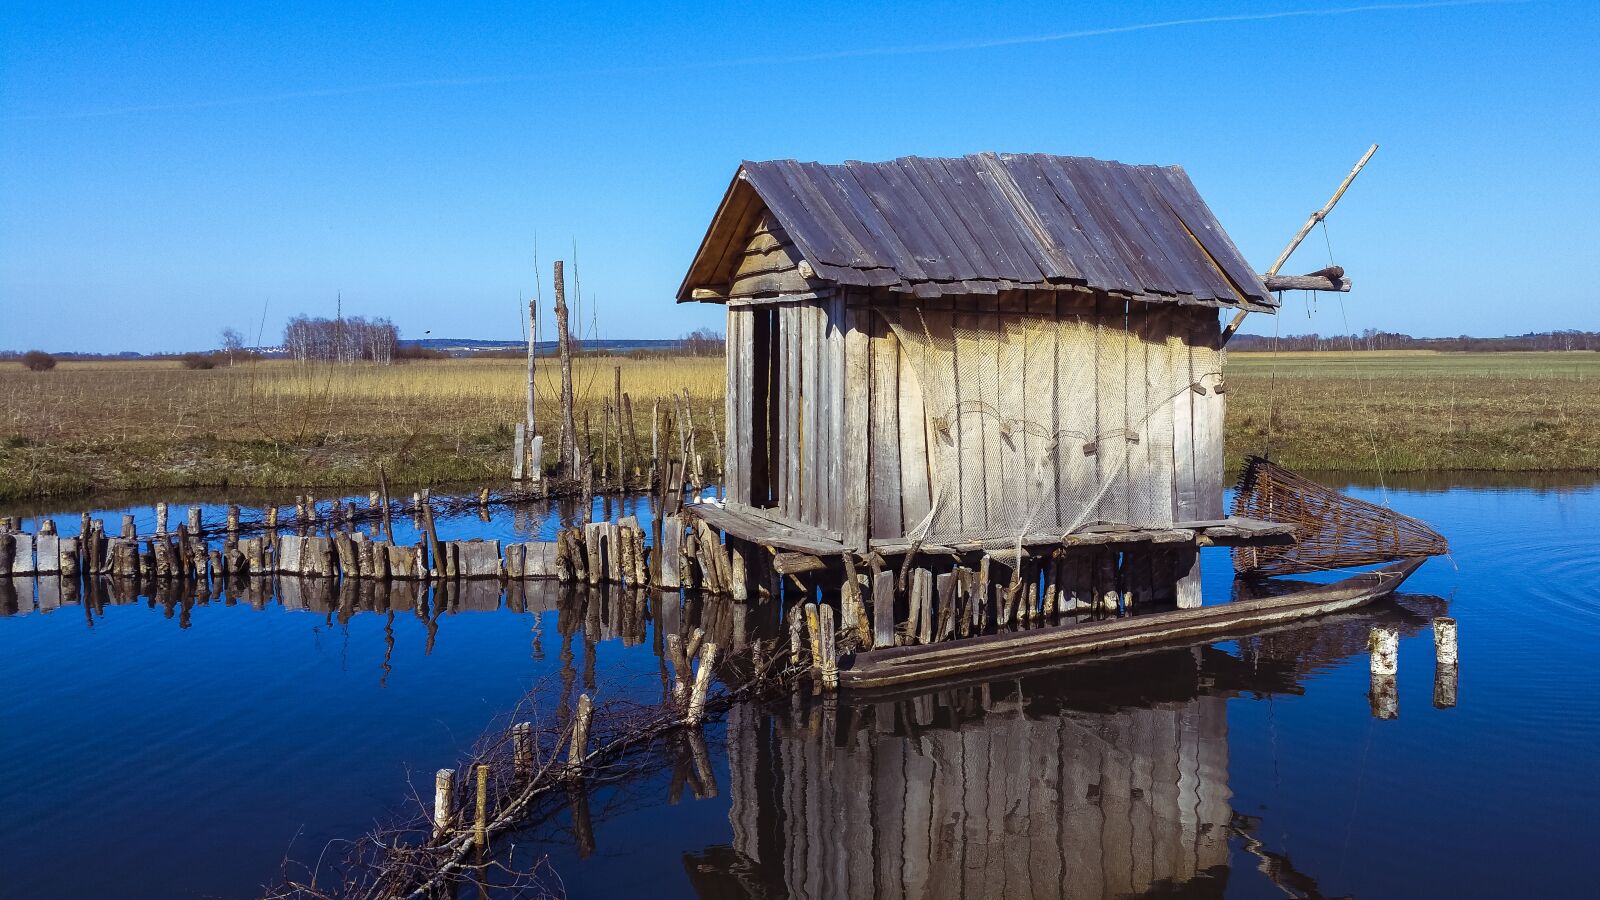 Samsung Galaxy S5 LTE-A sample photo. Fisherman's hut, old, abandoned photography